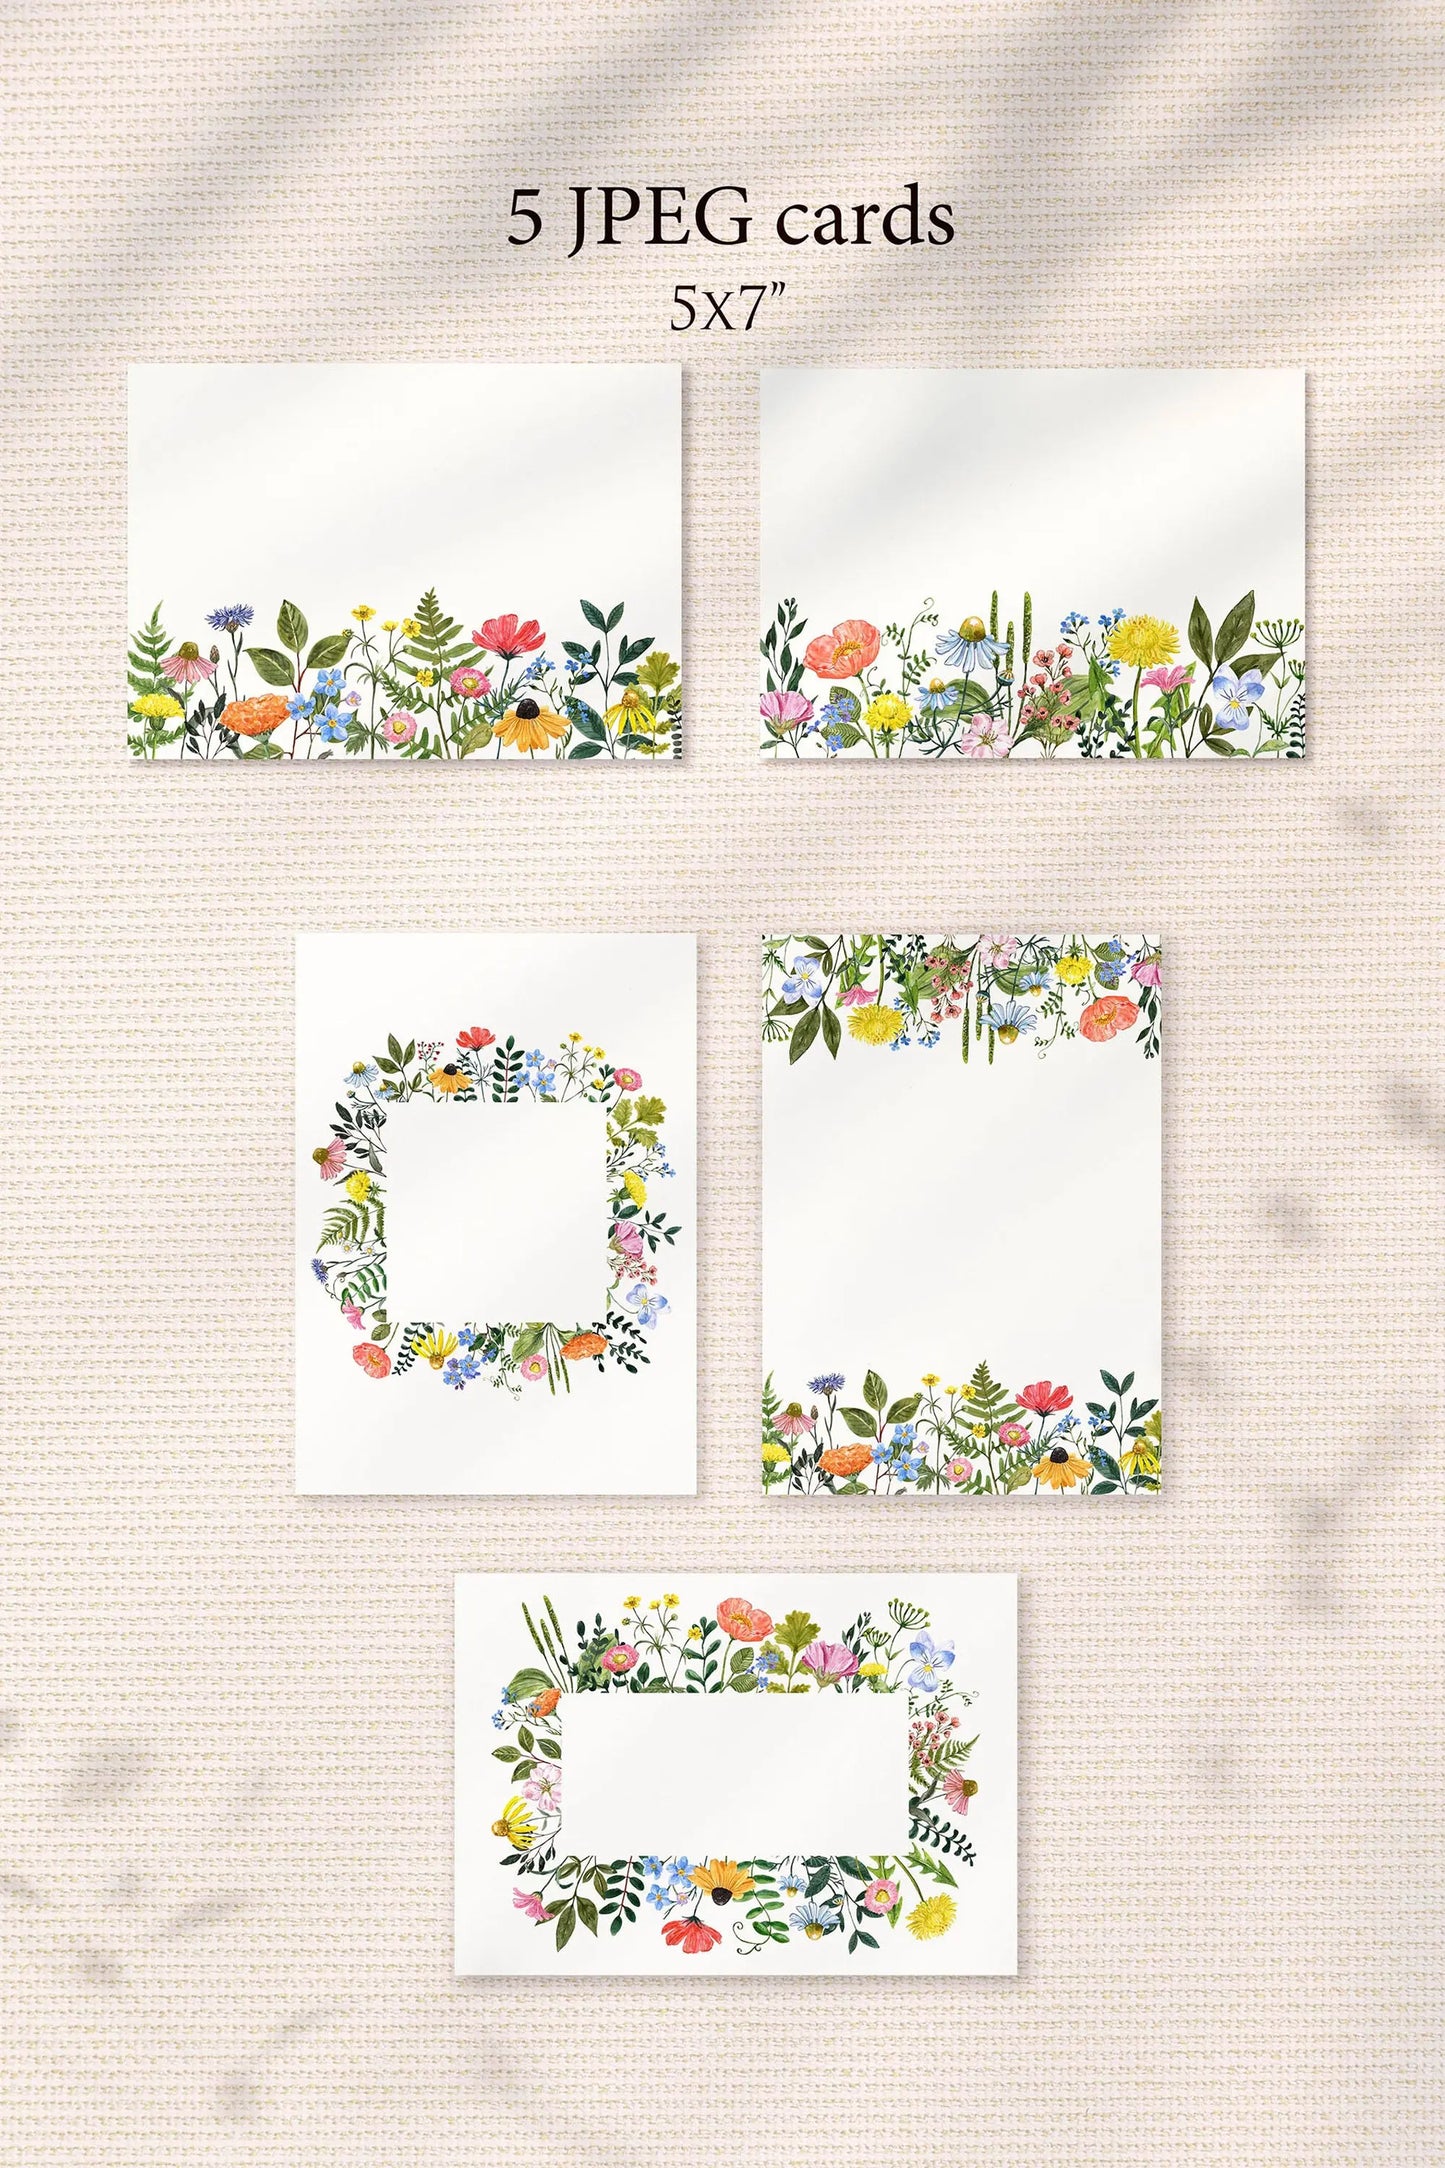 Watercolor Meadow Wildflower Frames and Borders clipart, watercolor wildflower clipart PNG, wildflower wedding invitation